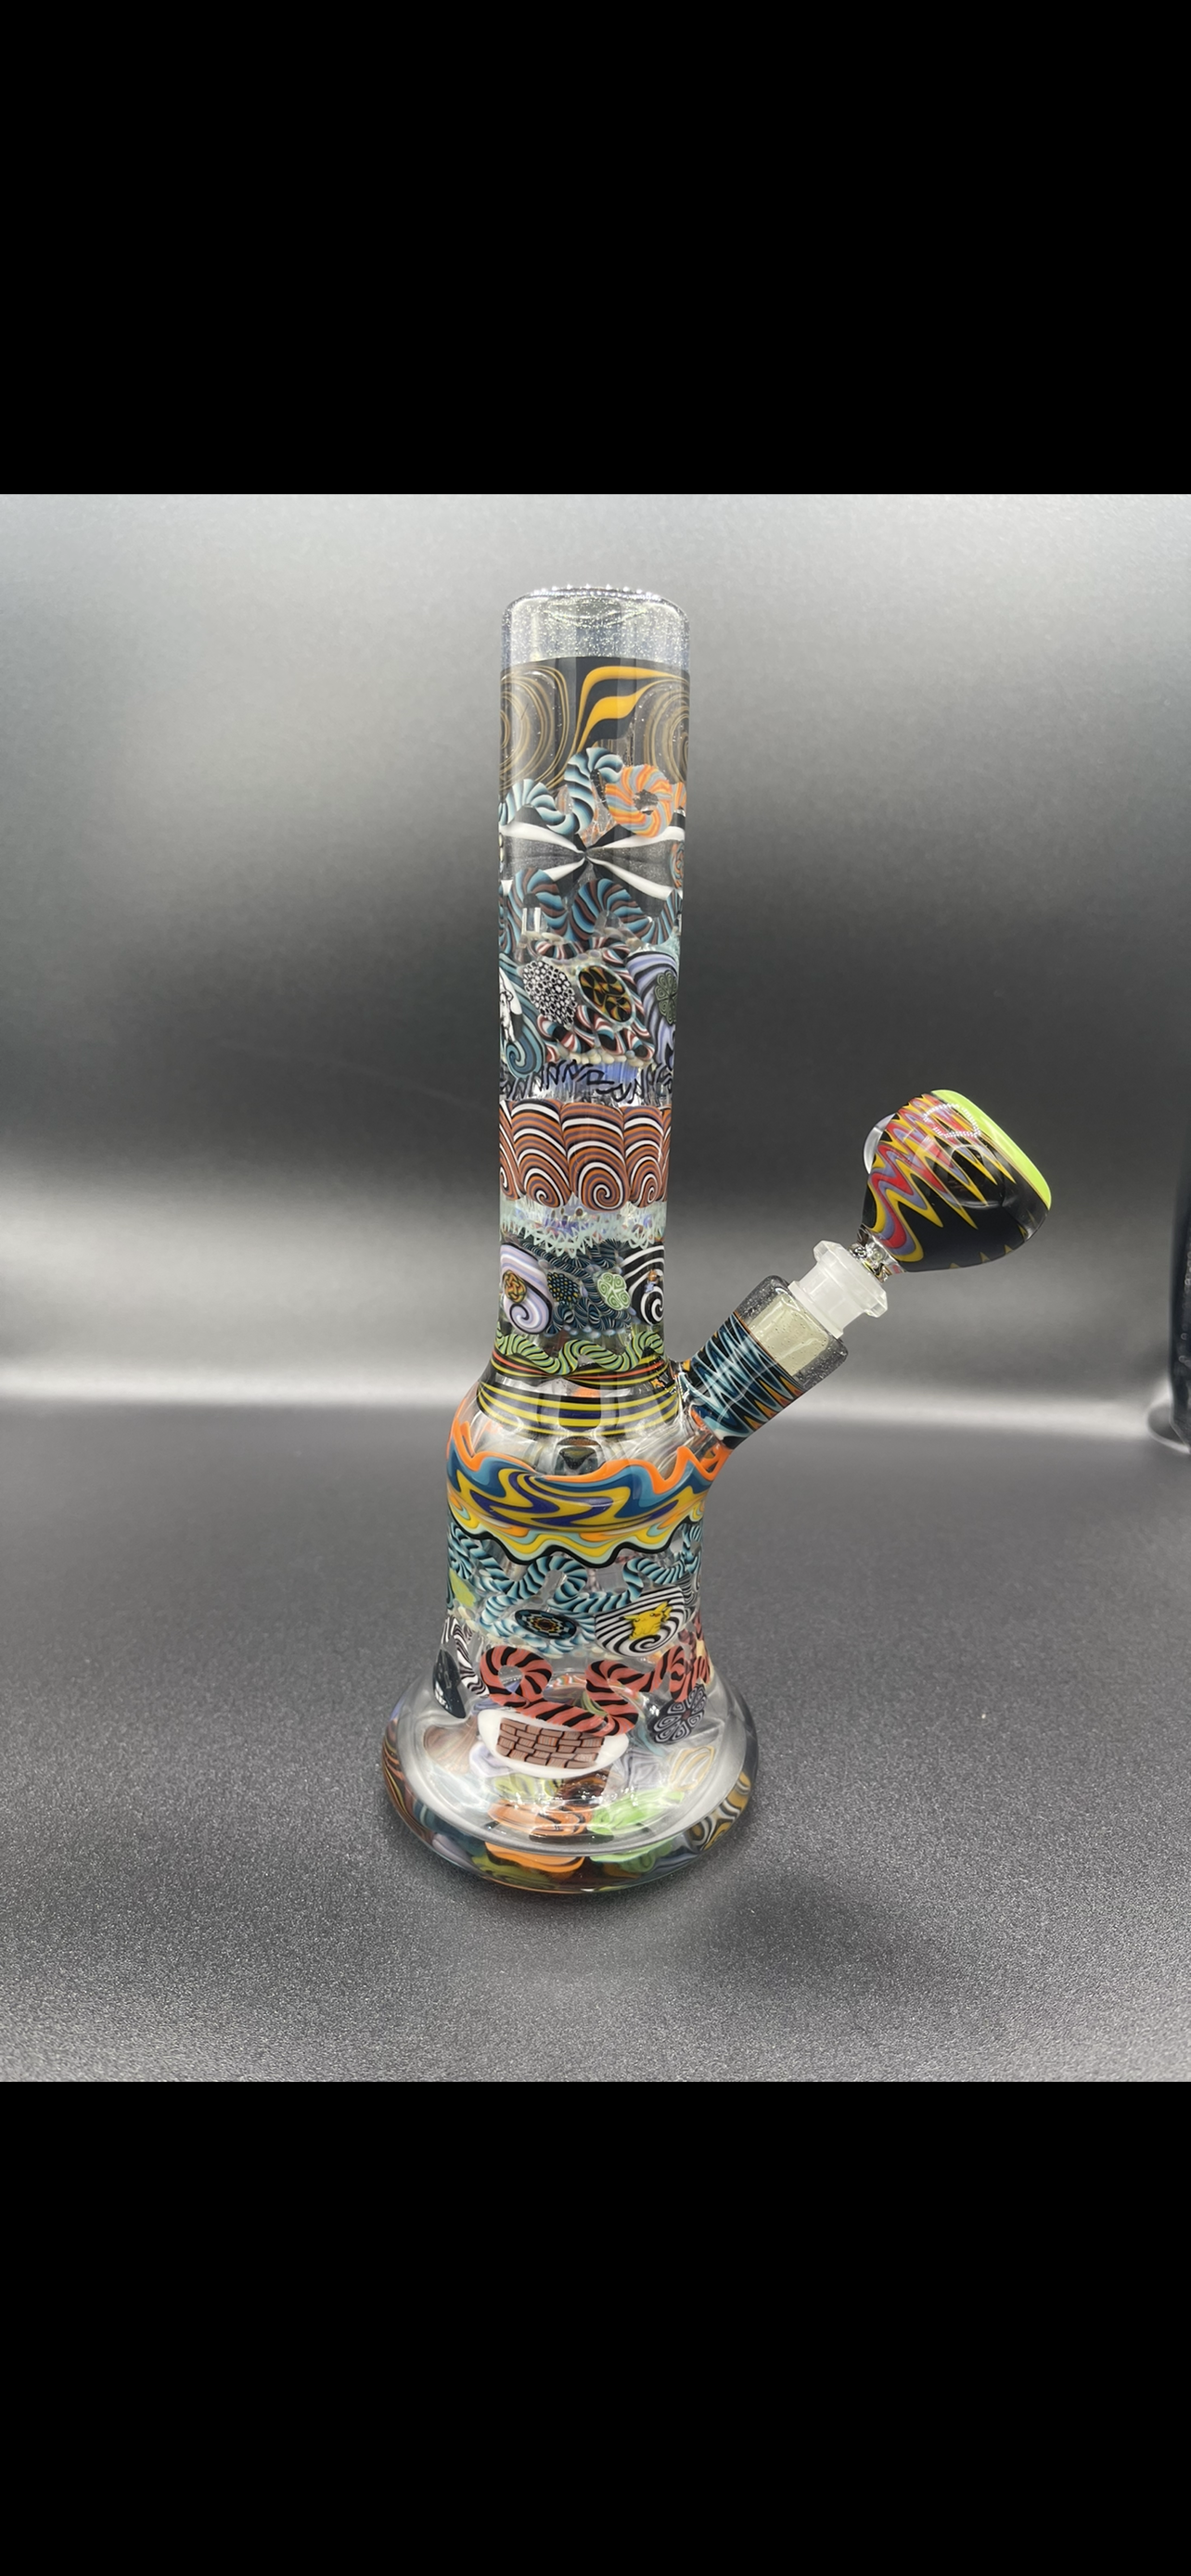 Millie Tube by Sic_Glass